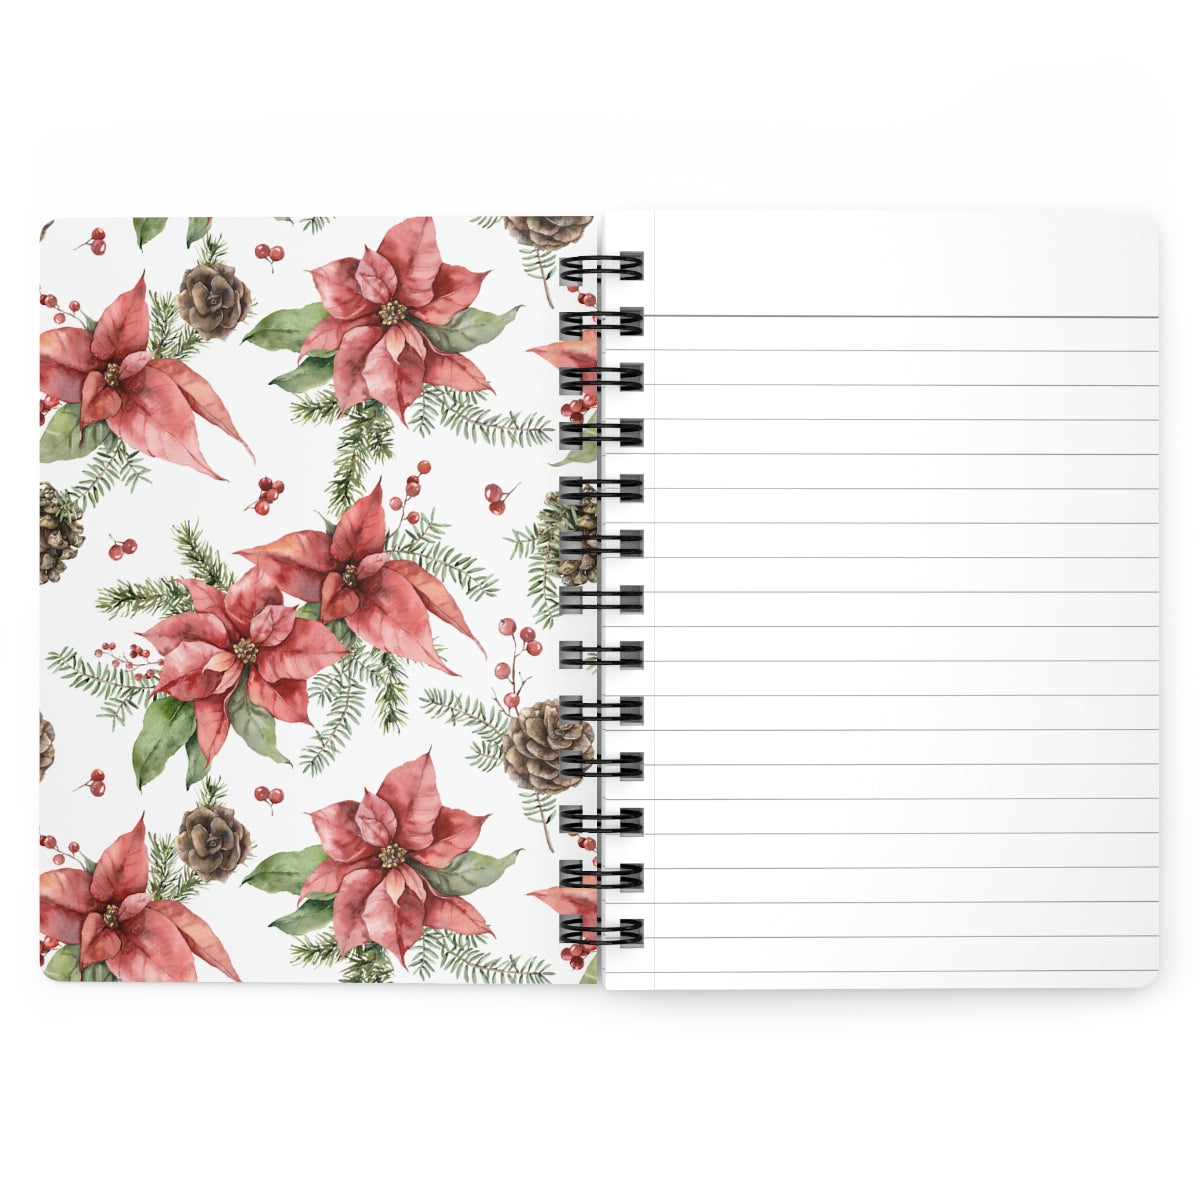 Poinsettia and Pine Cones Spiral Bound Journal